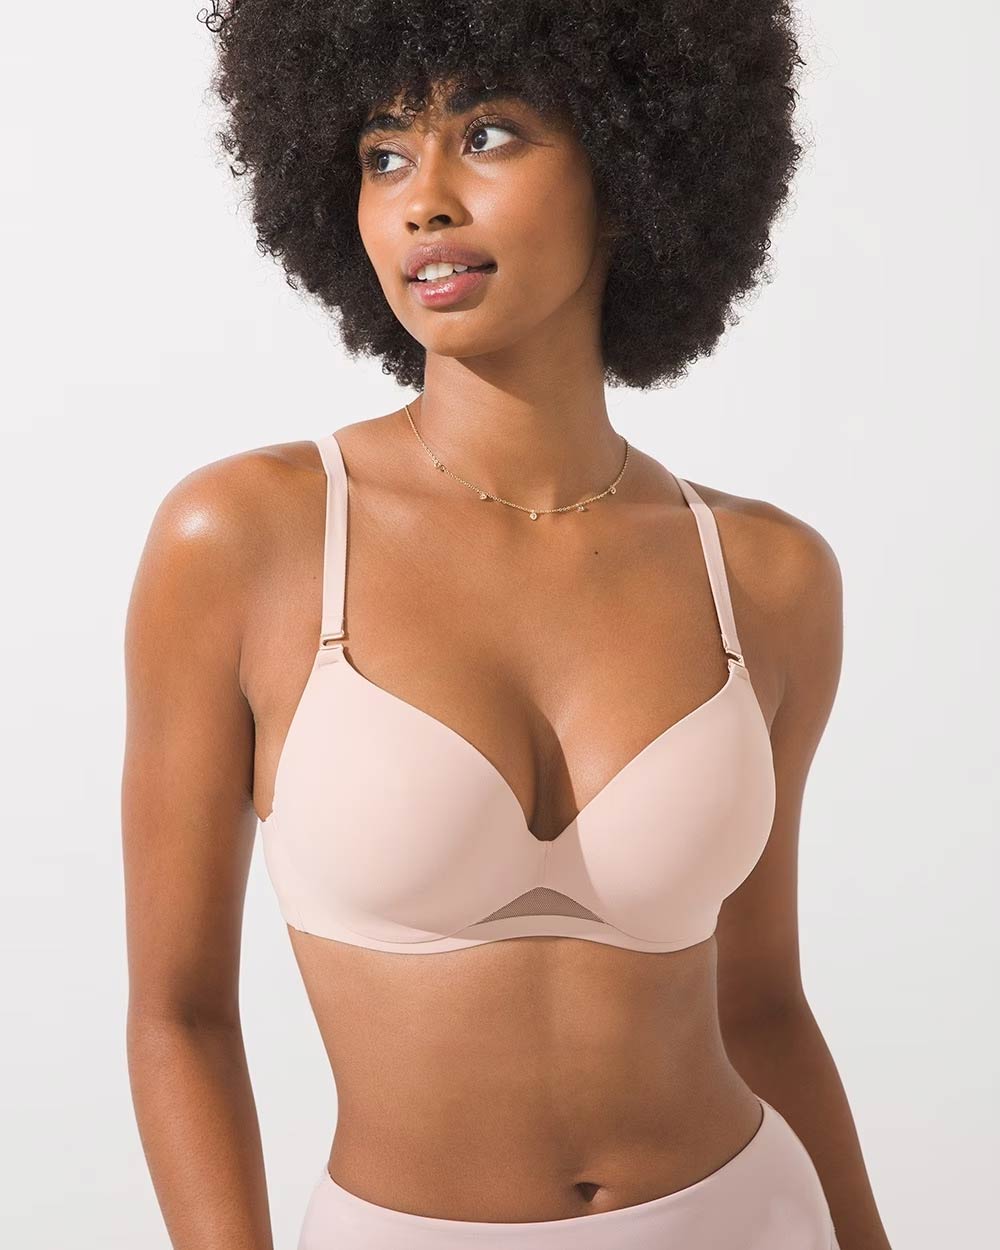 Soma<sup class=st-superscript>®</sup> women’s model wearing a light nude bra and panties, and gold charm necklace.